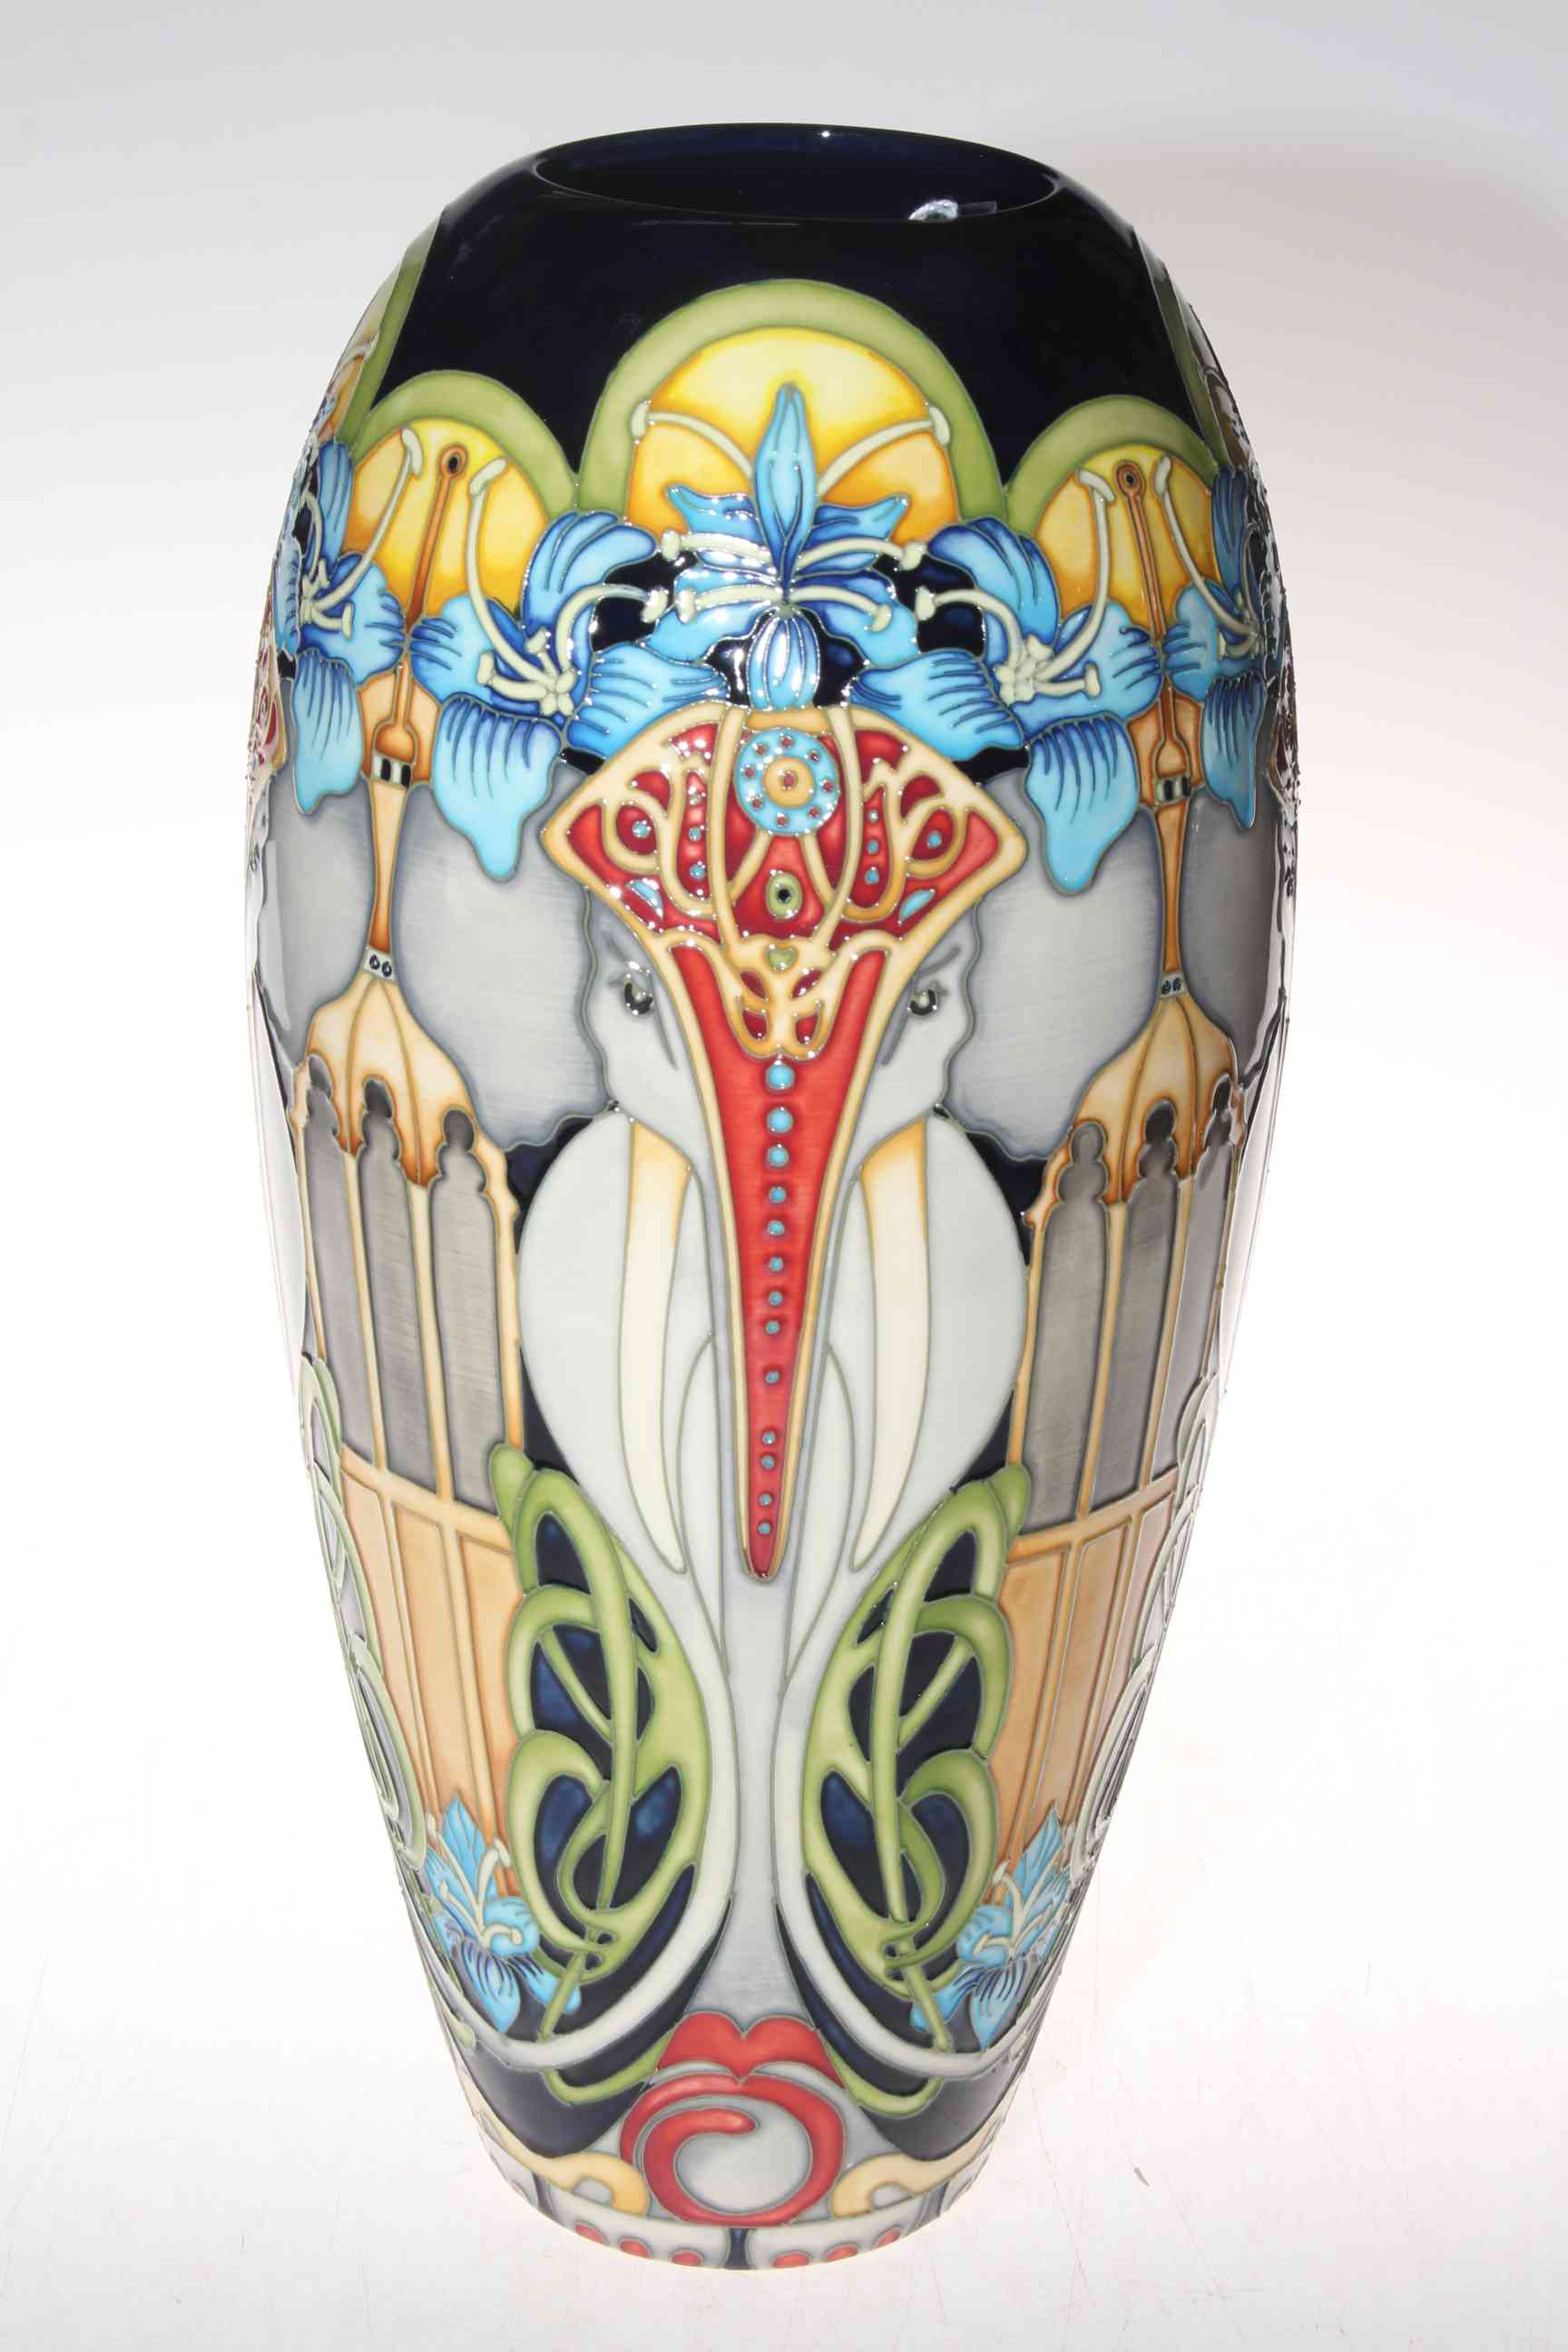 Moorcroft limited edition Dasaca vase by Kerry Goodwin, 60/200, 37cm, with box.